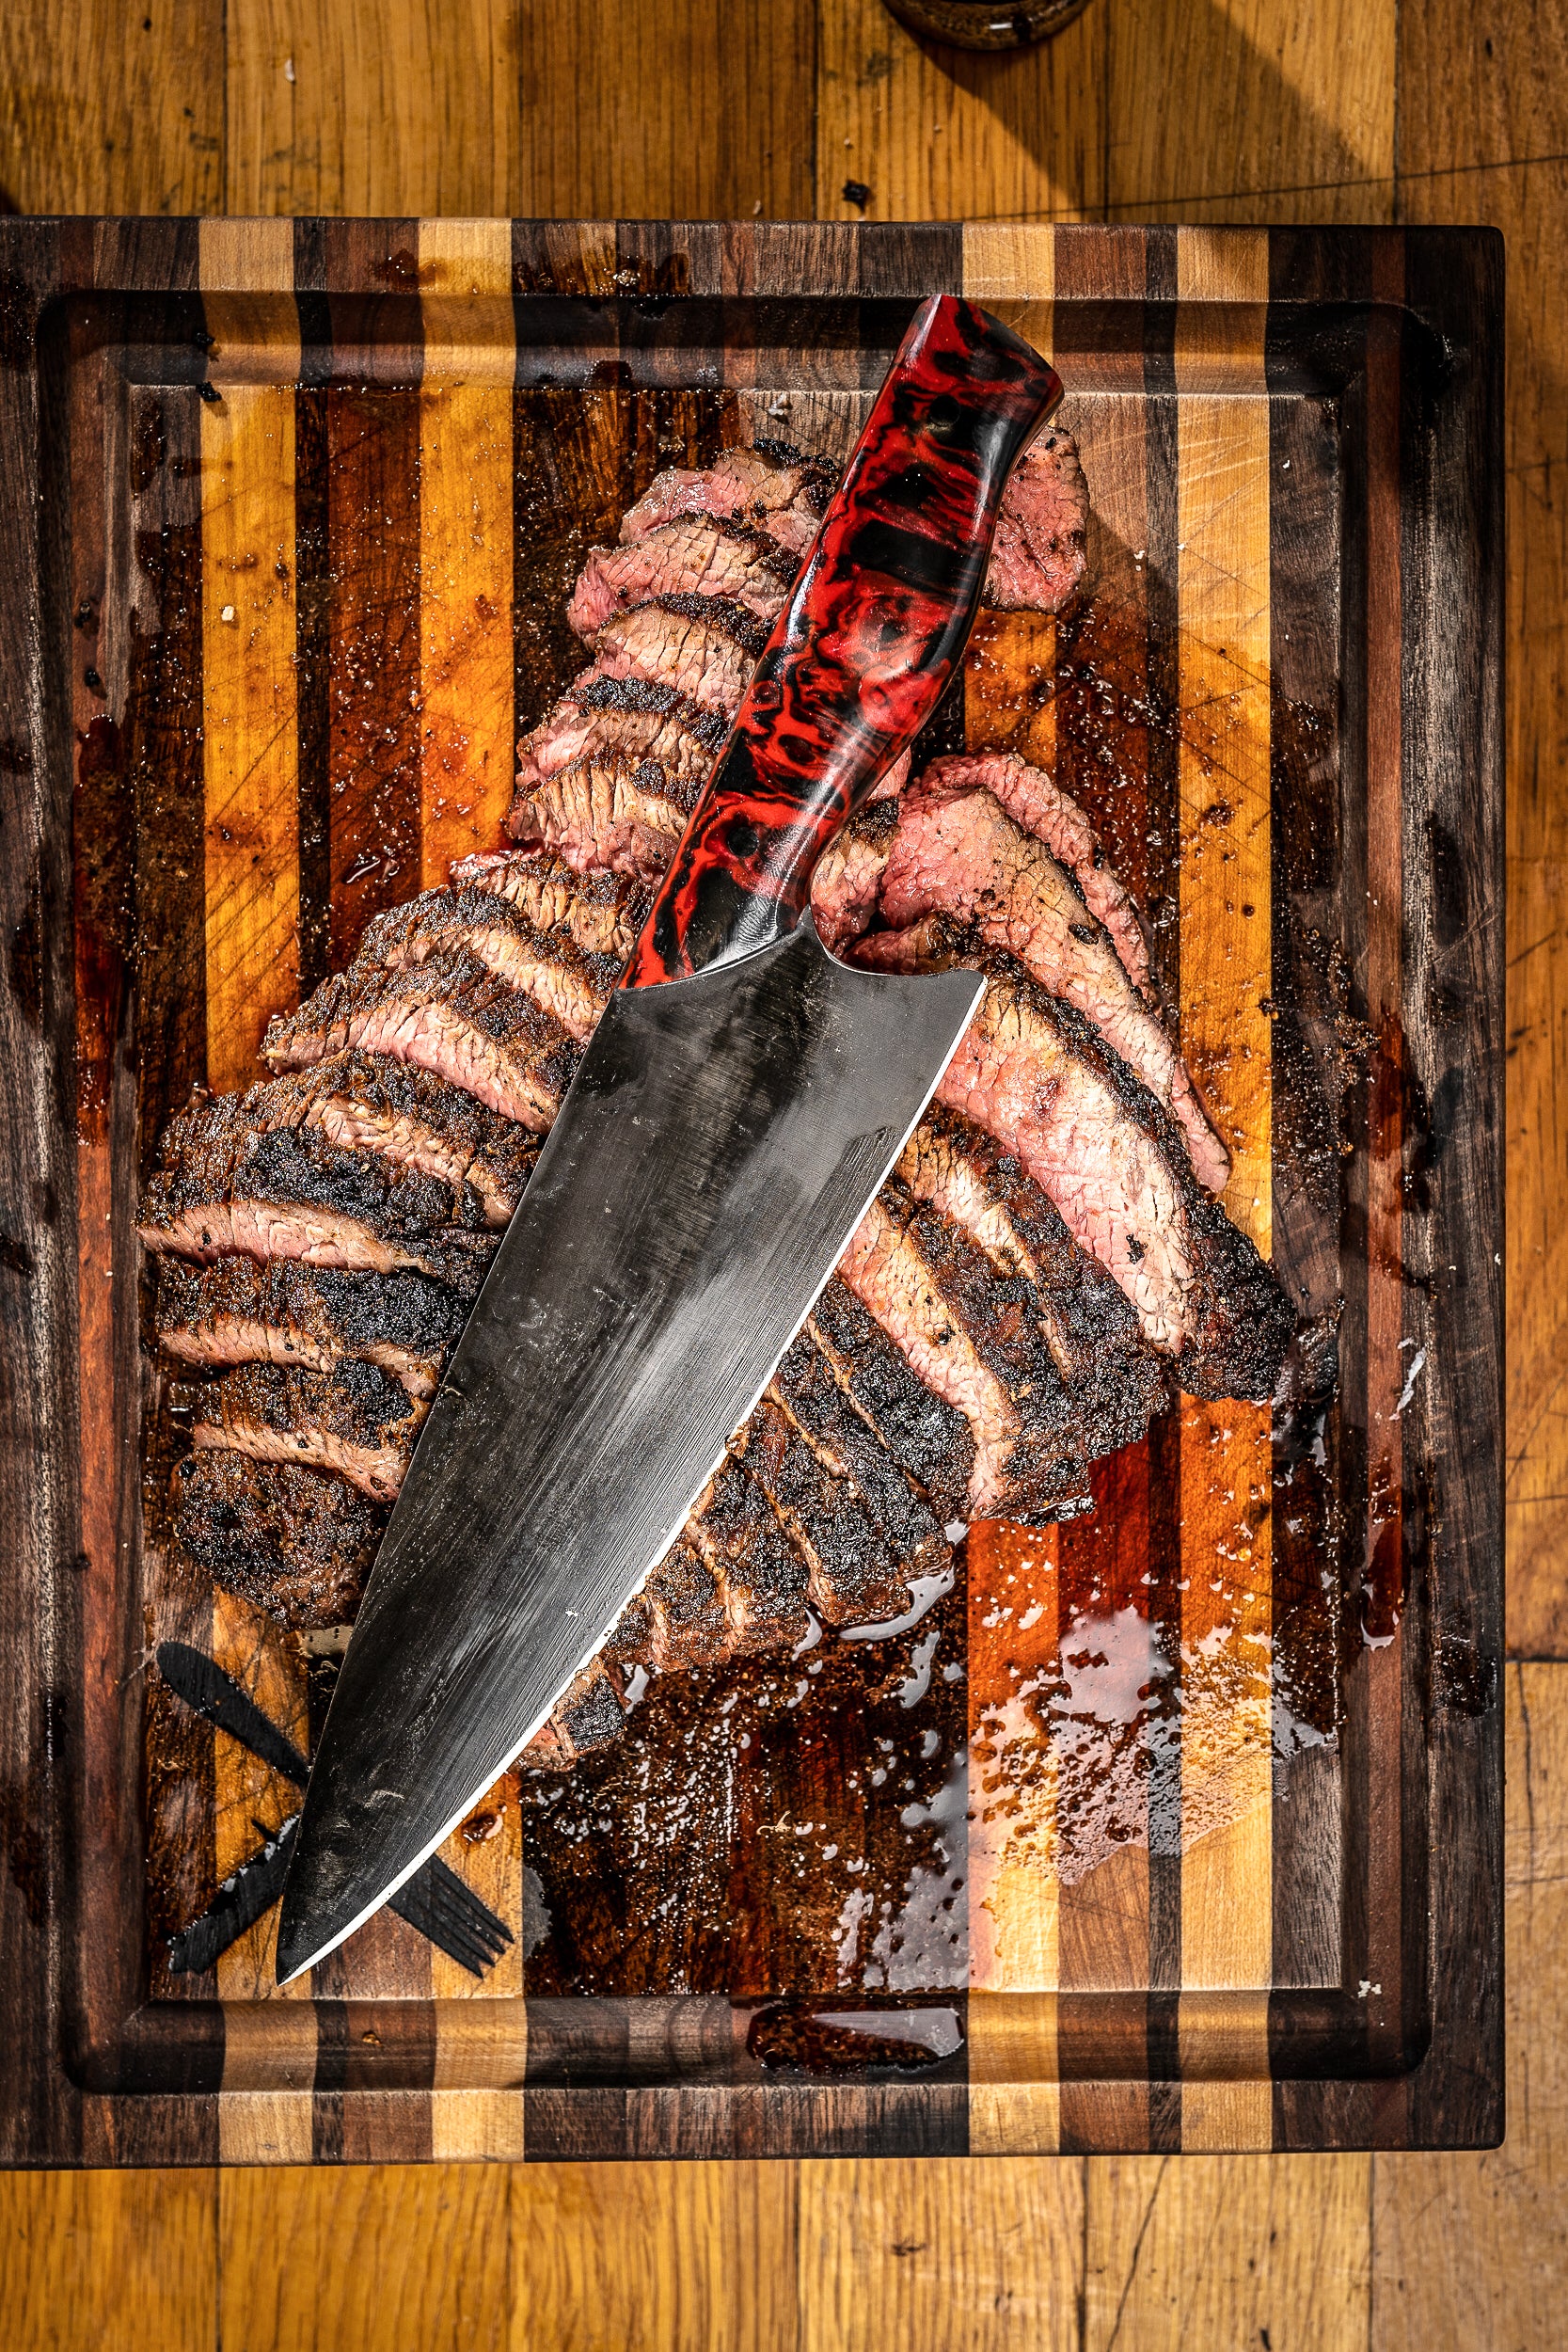 [SOLD OUT] STATHAKIS CHEF BLADE | BARREL FALLS BLADEWORKS COLLAB